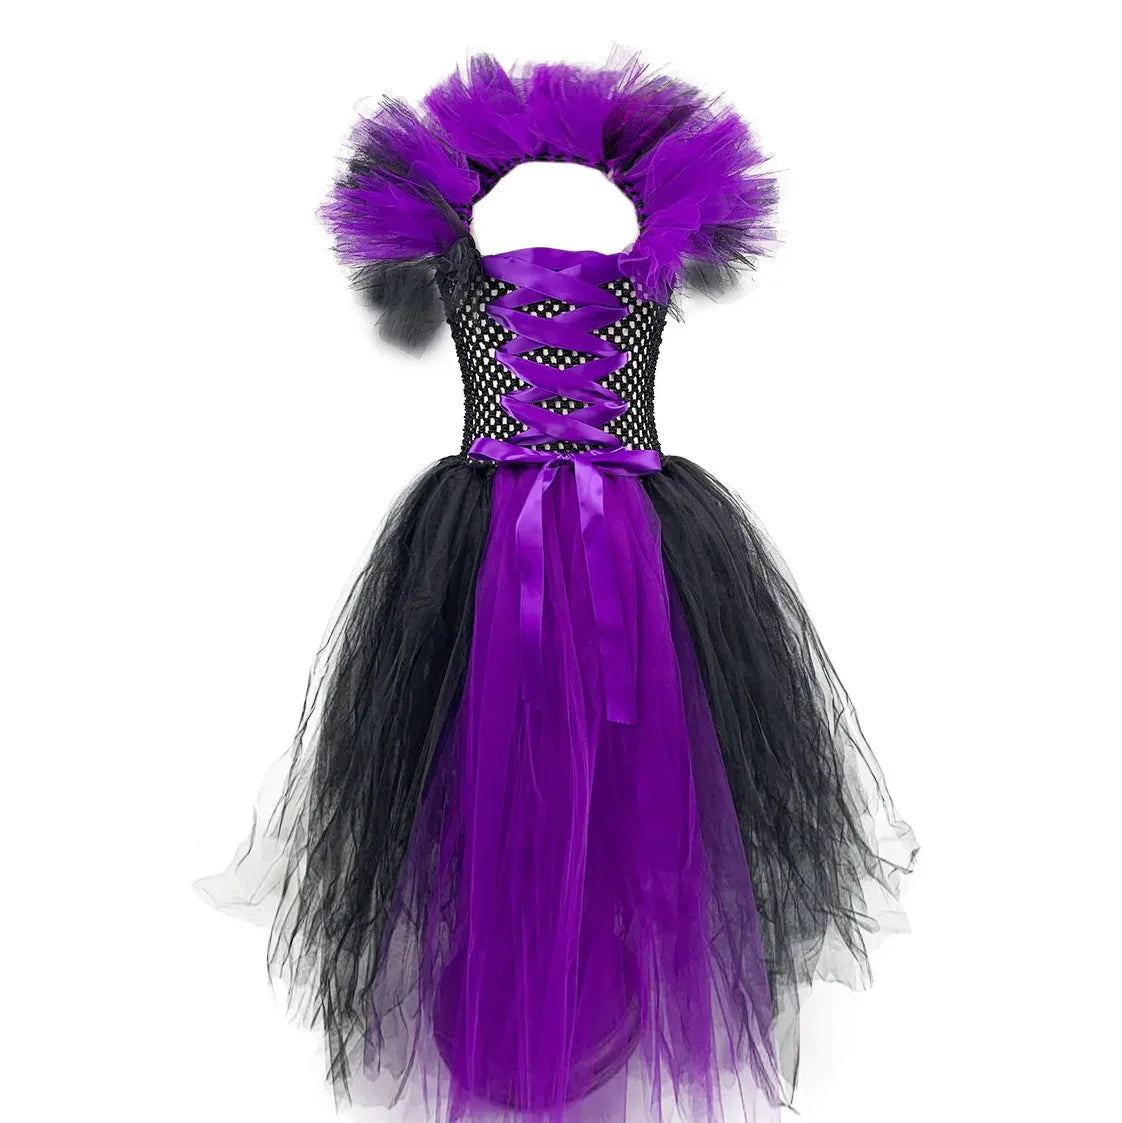 Disney Mistress of Evil Cosplay Outift Tutu Dress for Little Girls Kntting Handmade Maleficent Costume Kid Halloween Witch Frock